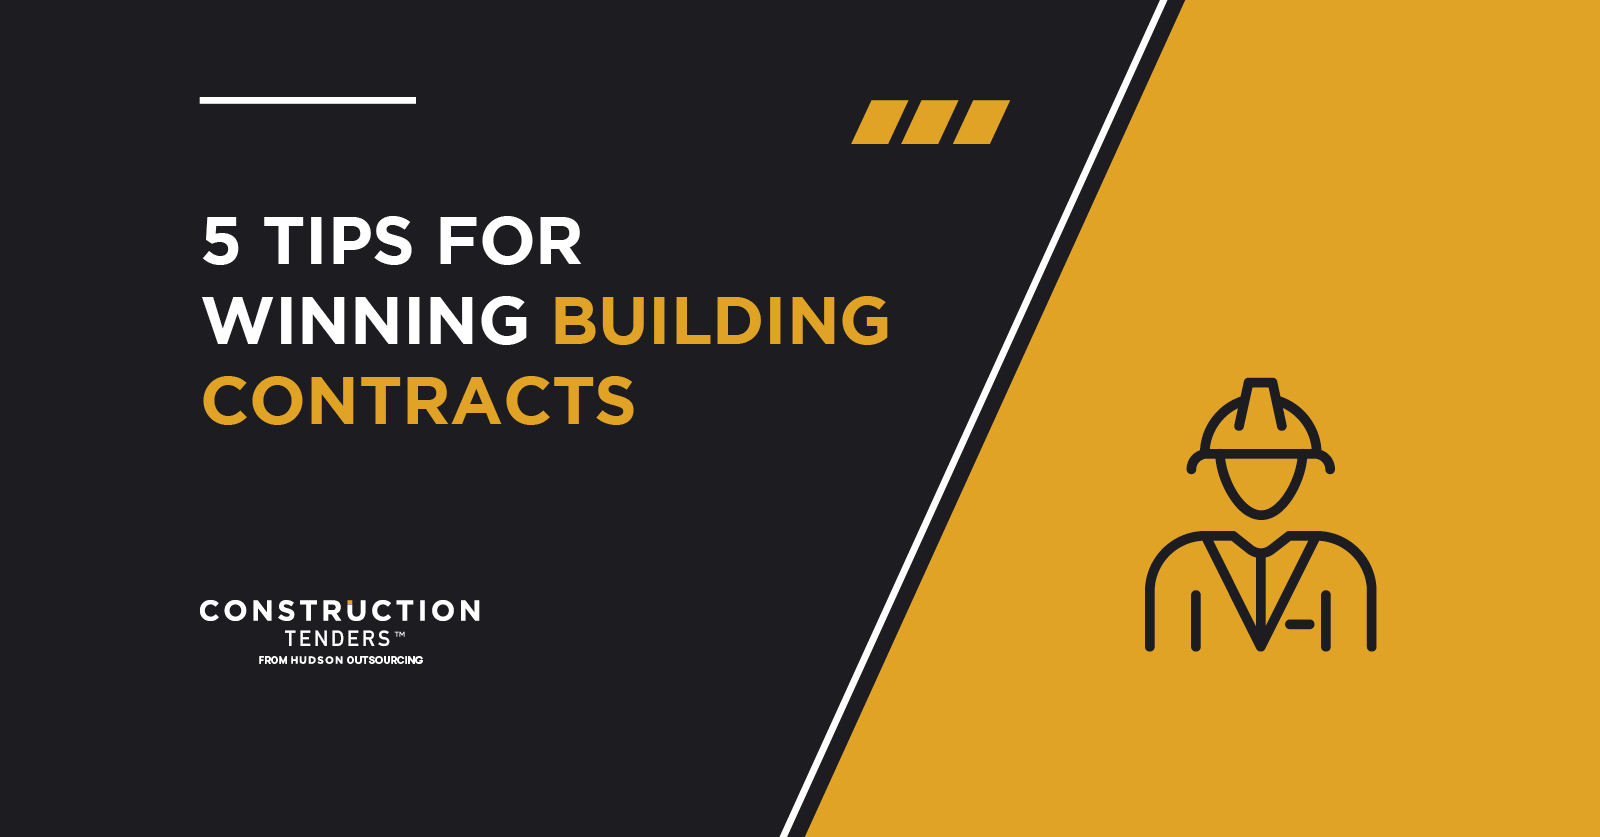 How to Win Building Contracts | Construction Tenders